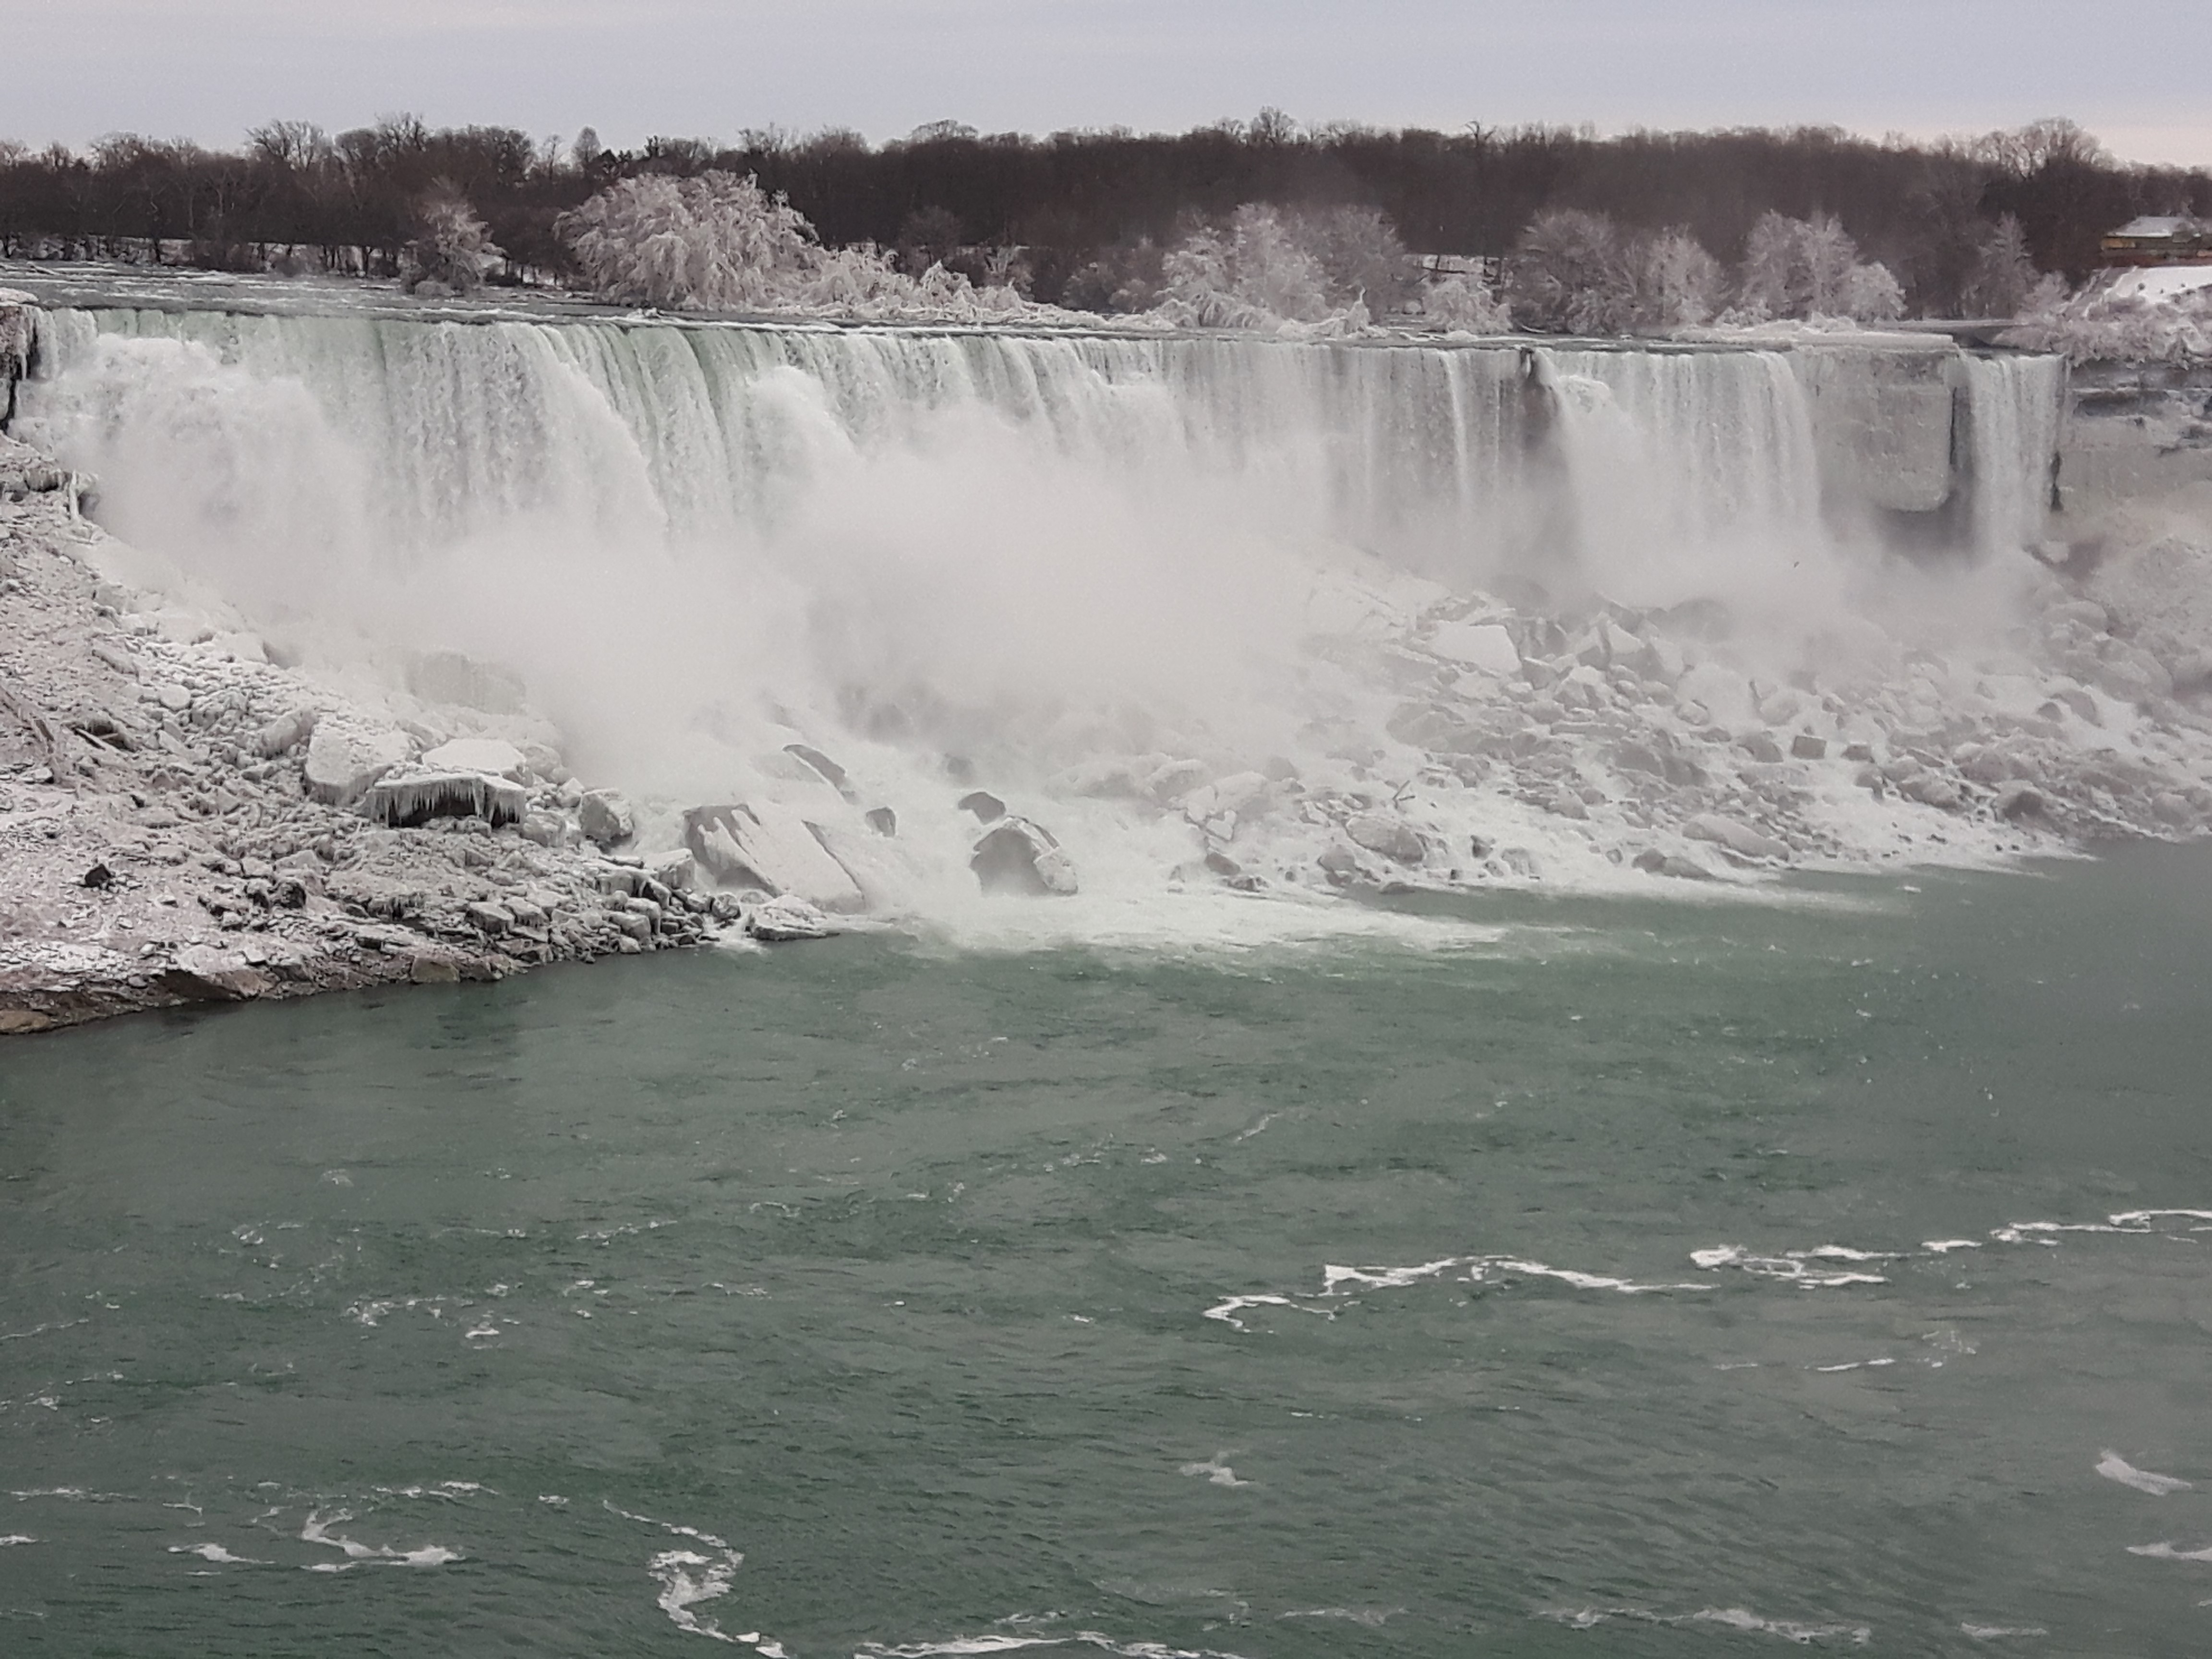 The American and Canadian Falls are magical during the Winter